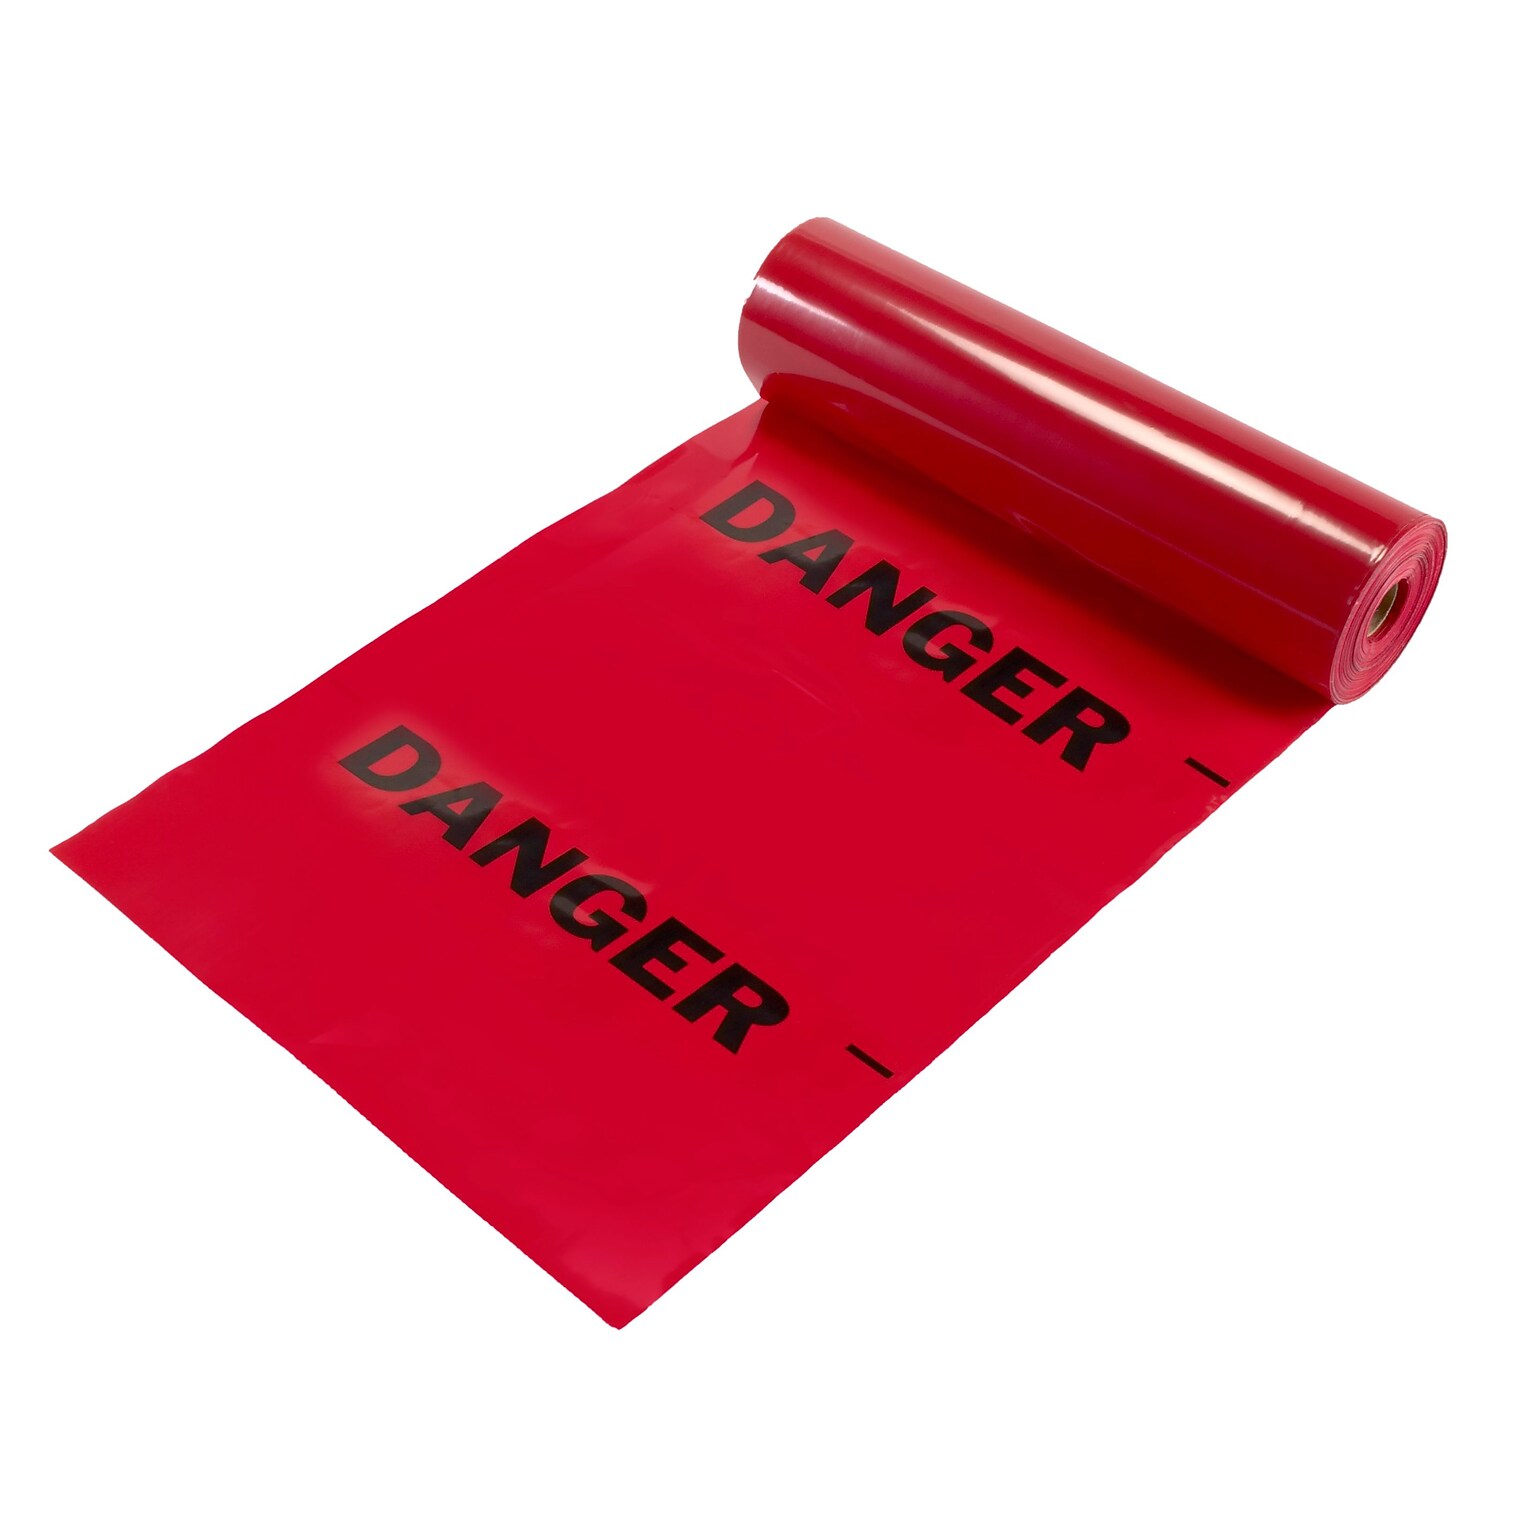 Mutual Industries Danger Printed Tear-Off Safety Flag, 12 x 12 x 1500, Red